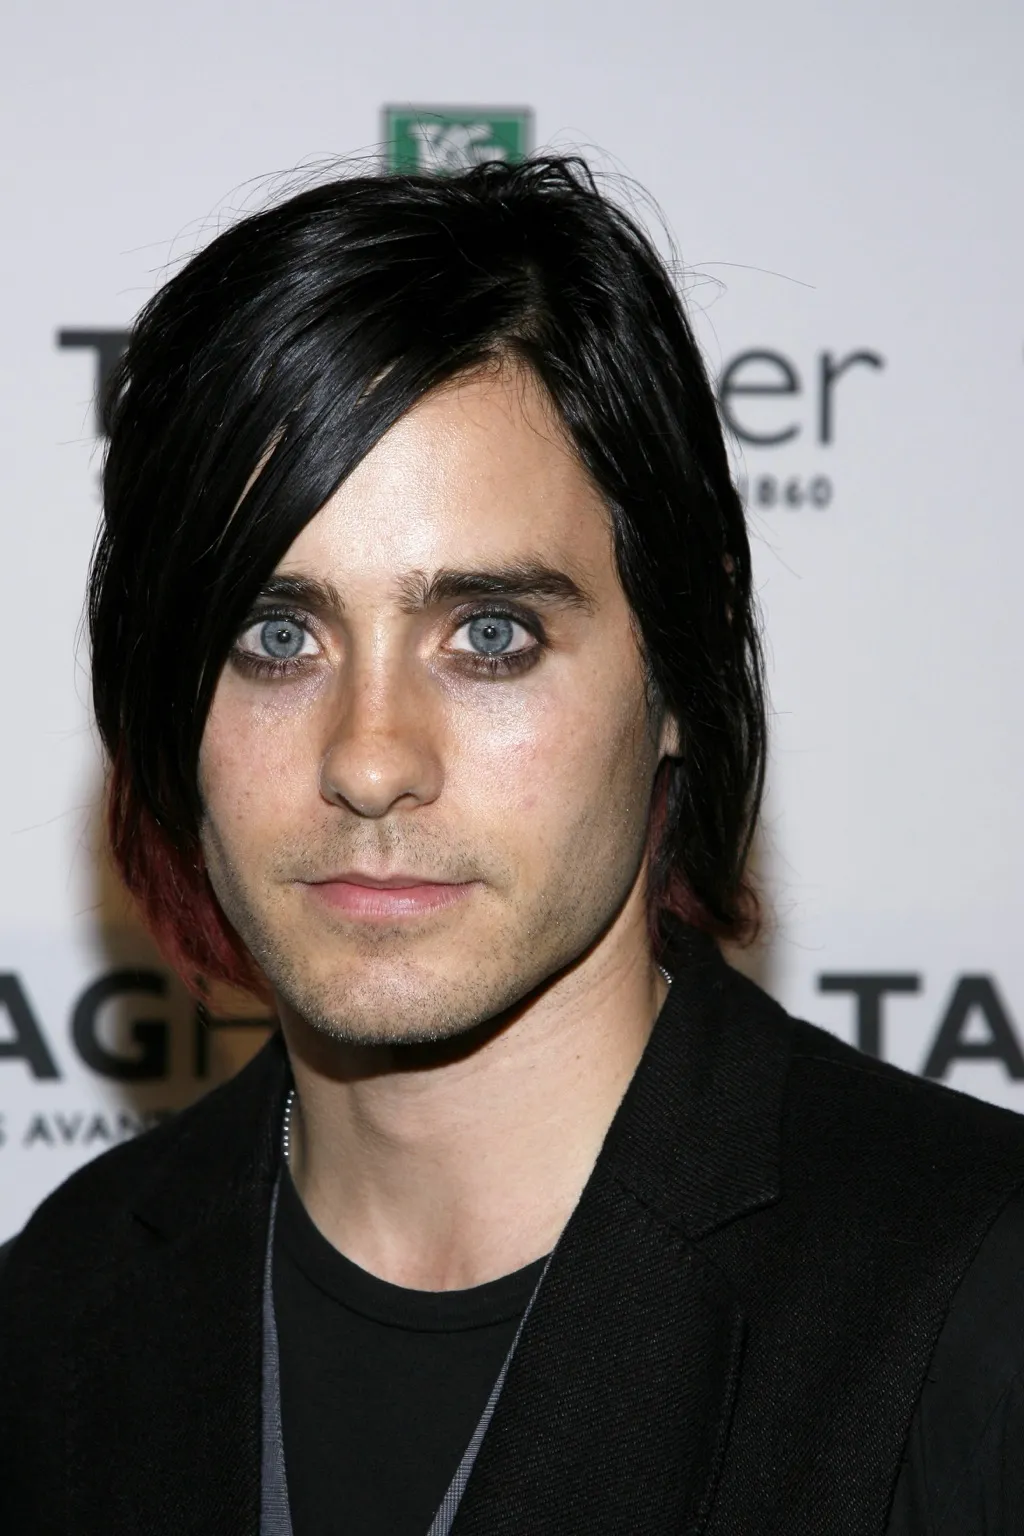 Jared Leto with long man bangs, something no man over 40 should wear